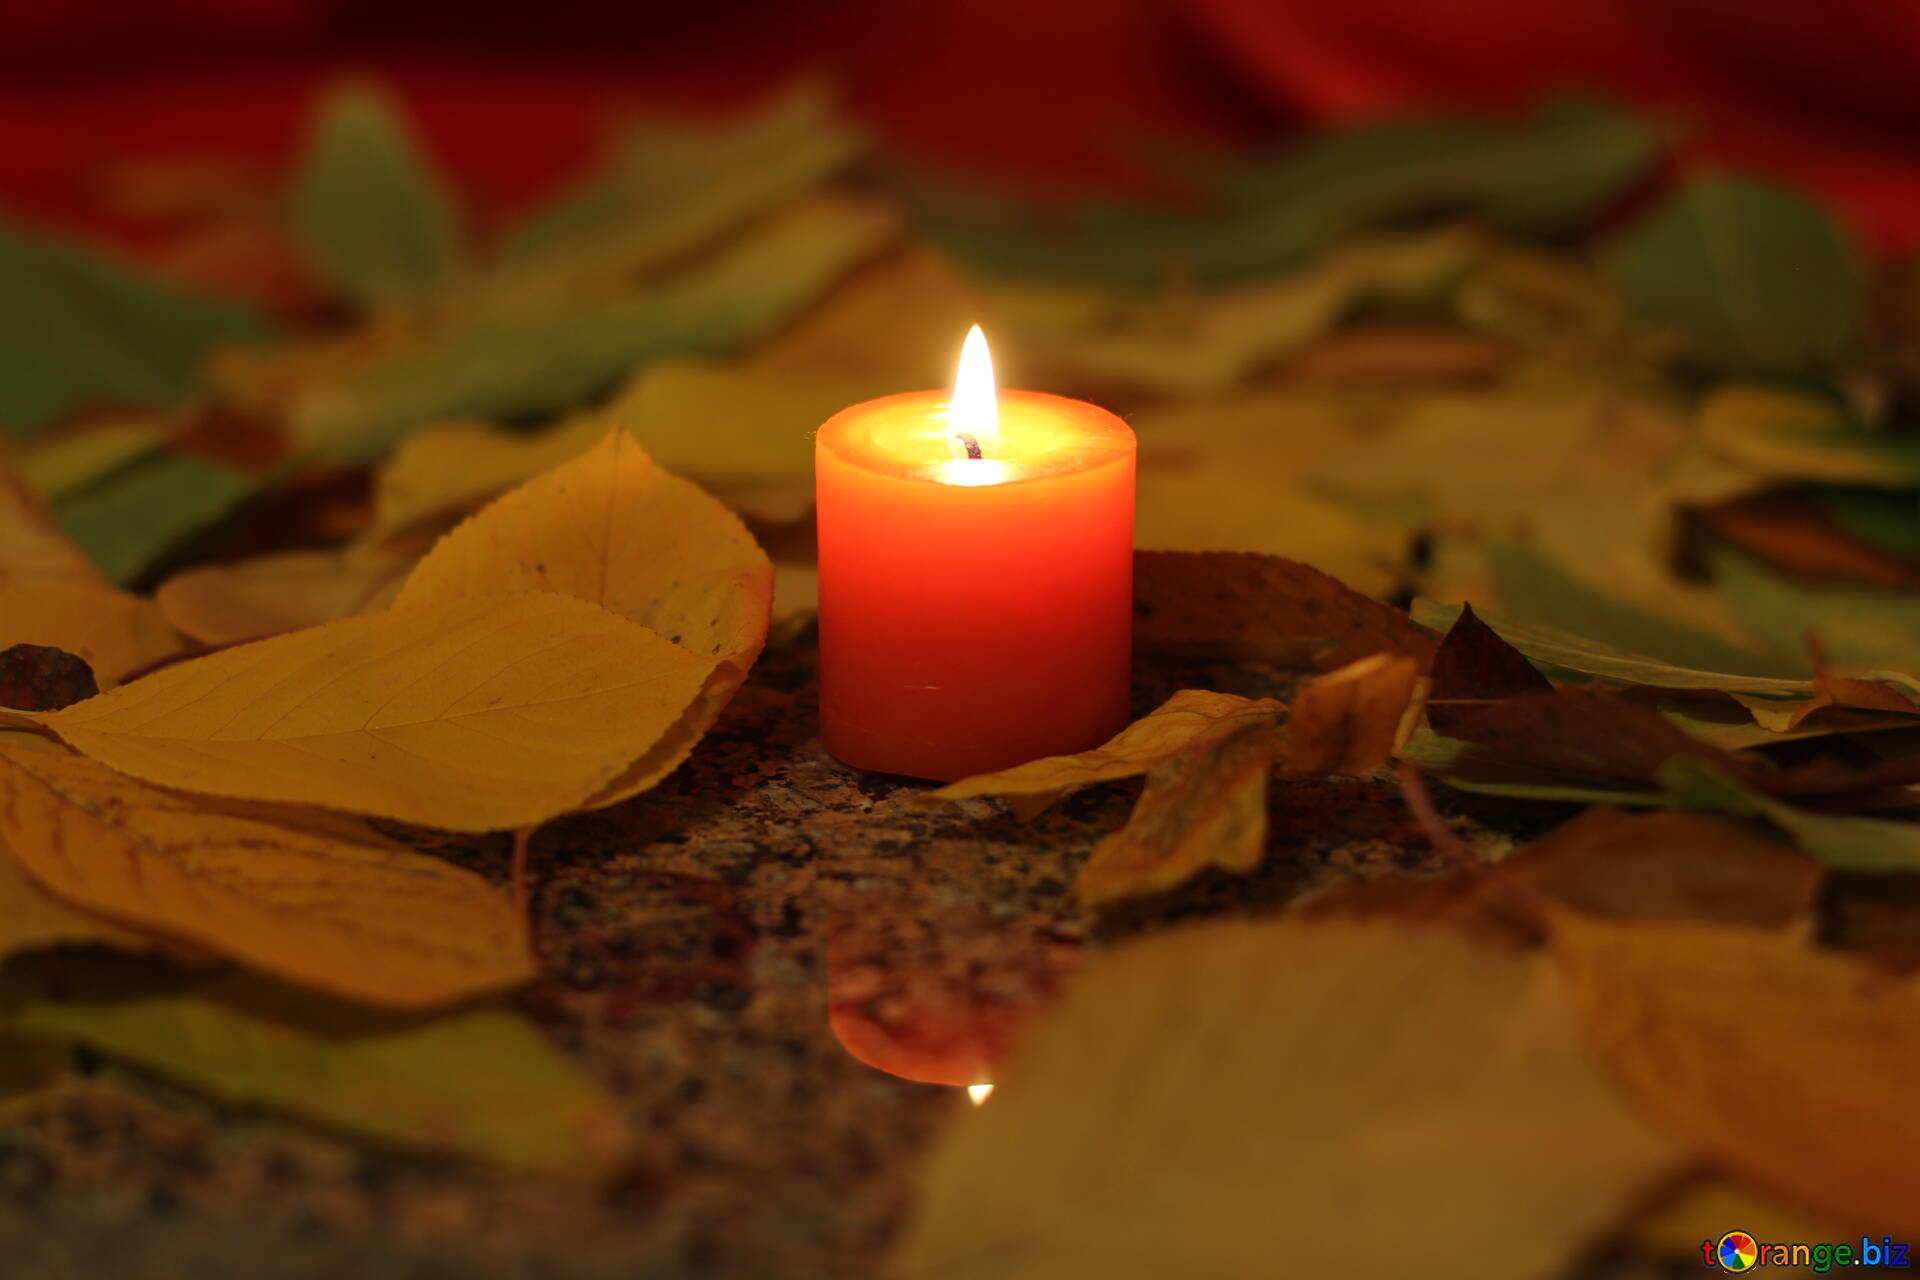 Autumn Leaves Image Candle And Autumn Leaves Image Leaves № 24252. Torange.biz Free Pics On Cc By License